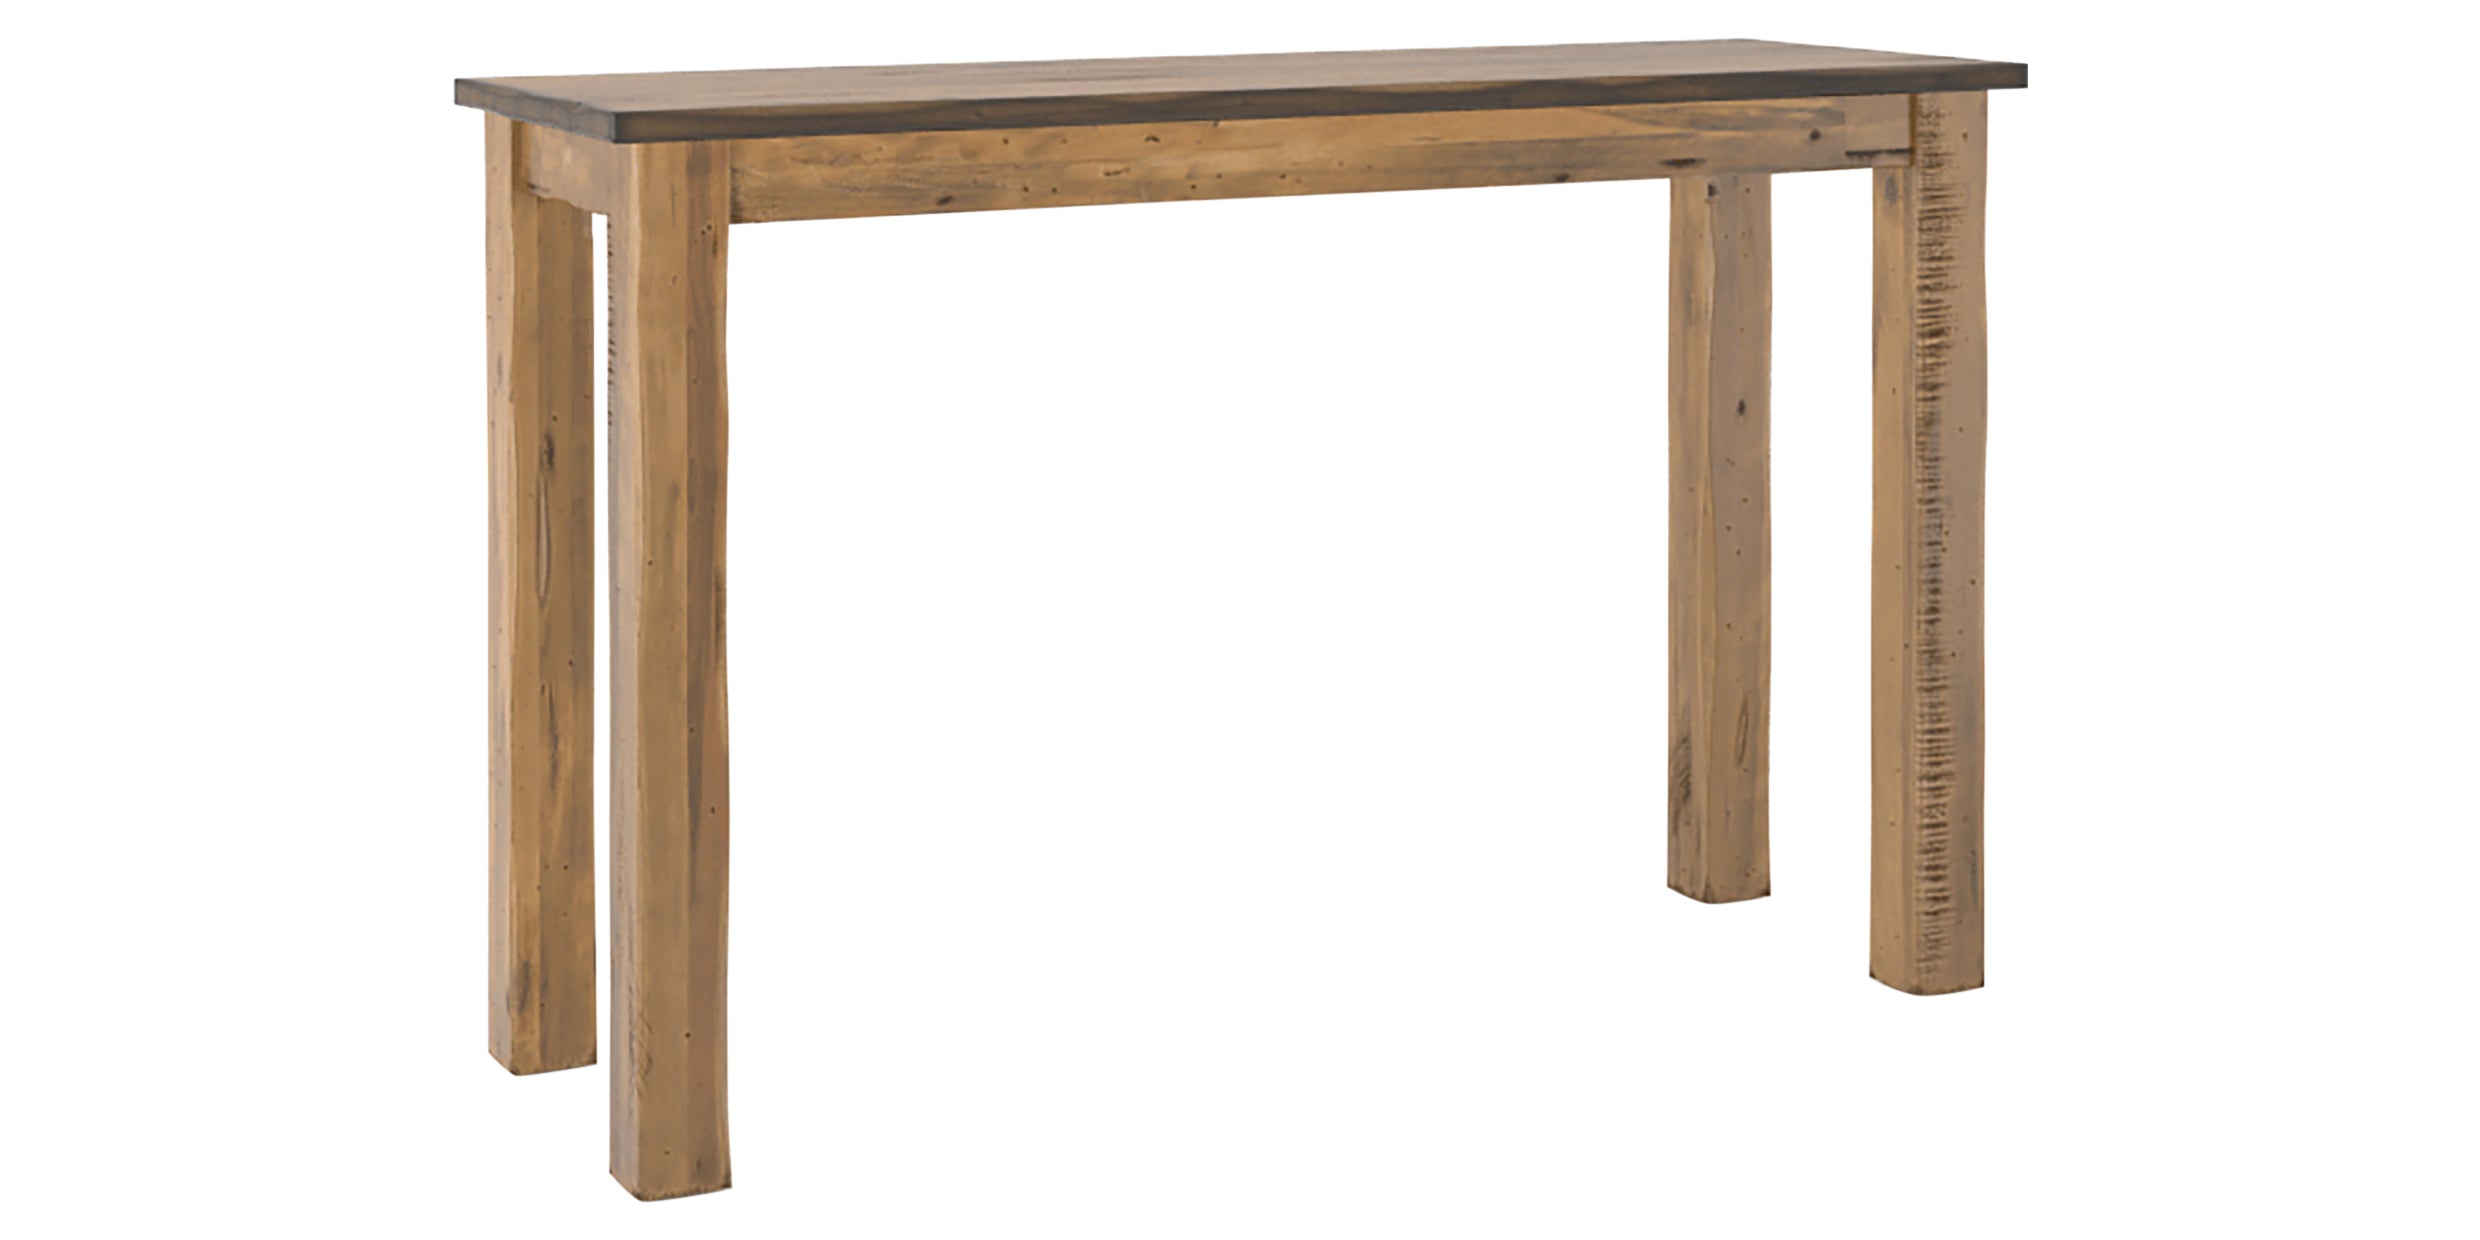 Oak Washed with HD Legs | Canadel Champlain Sofa Table 1648 | Valley Ridge Furniture